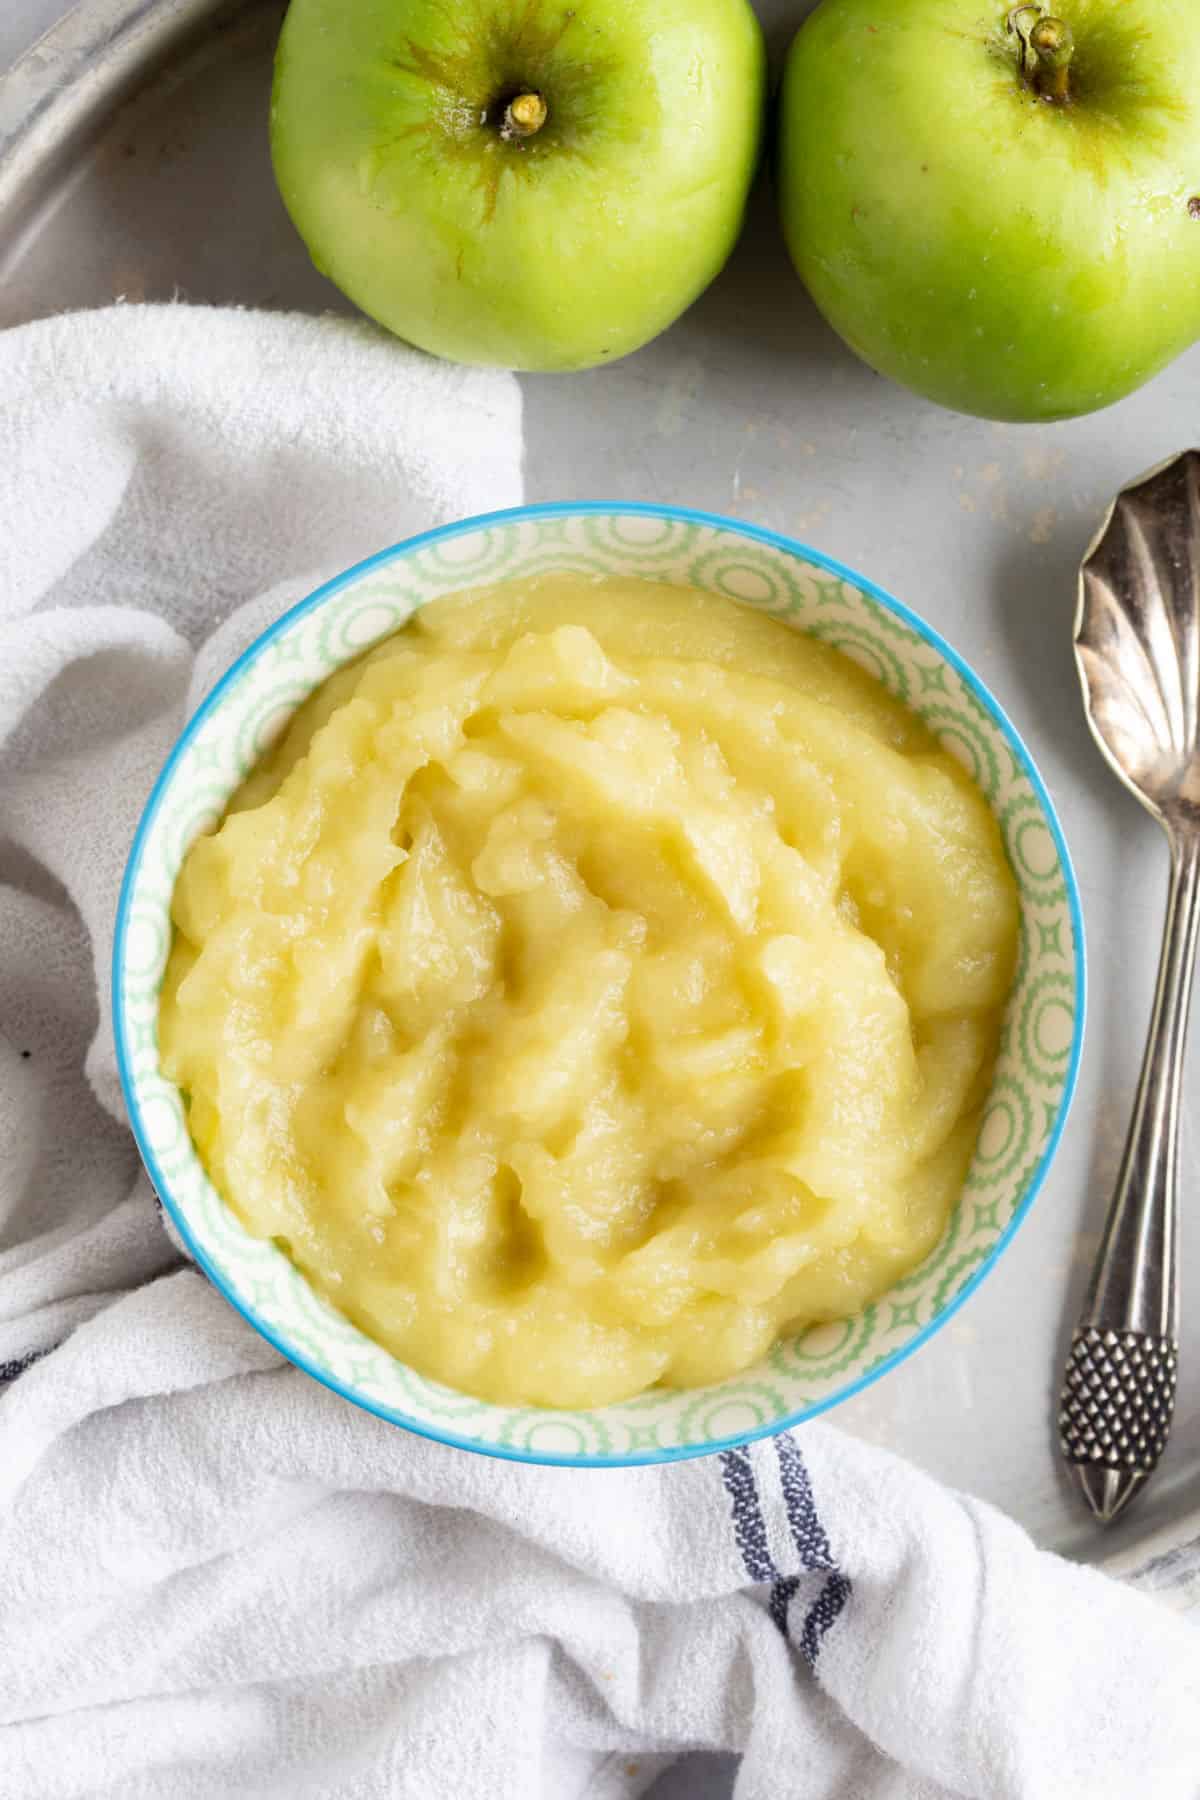 Apple sauce in a bowl.